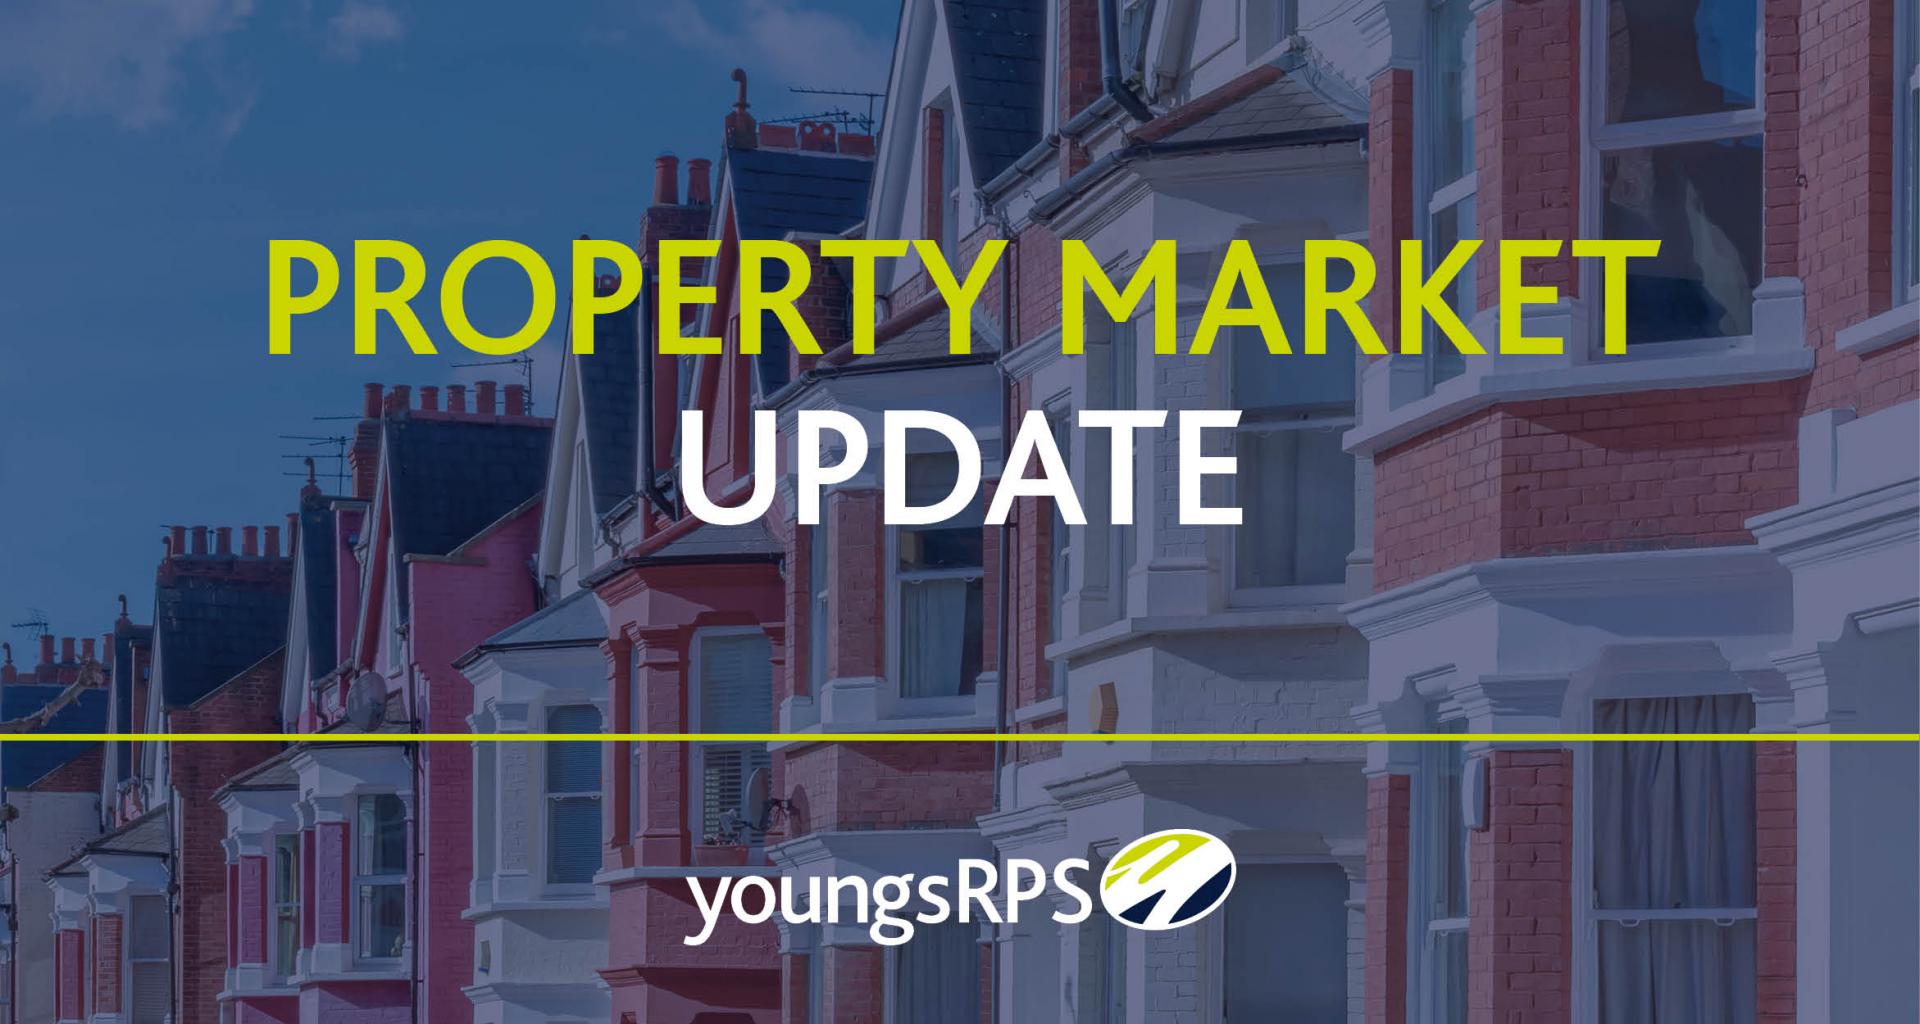 housing market update north east January 2022